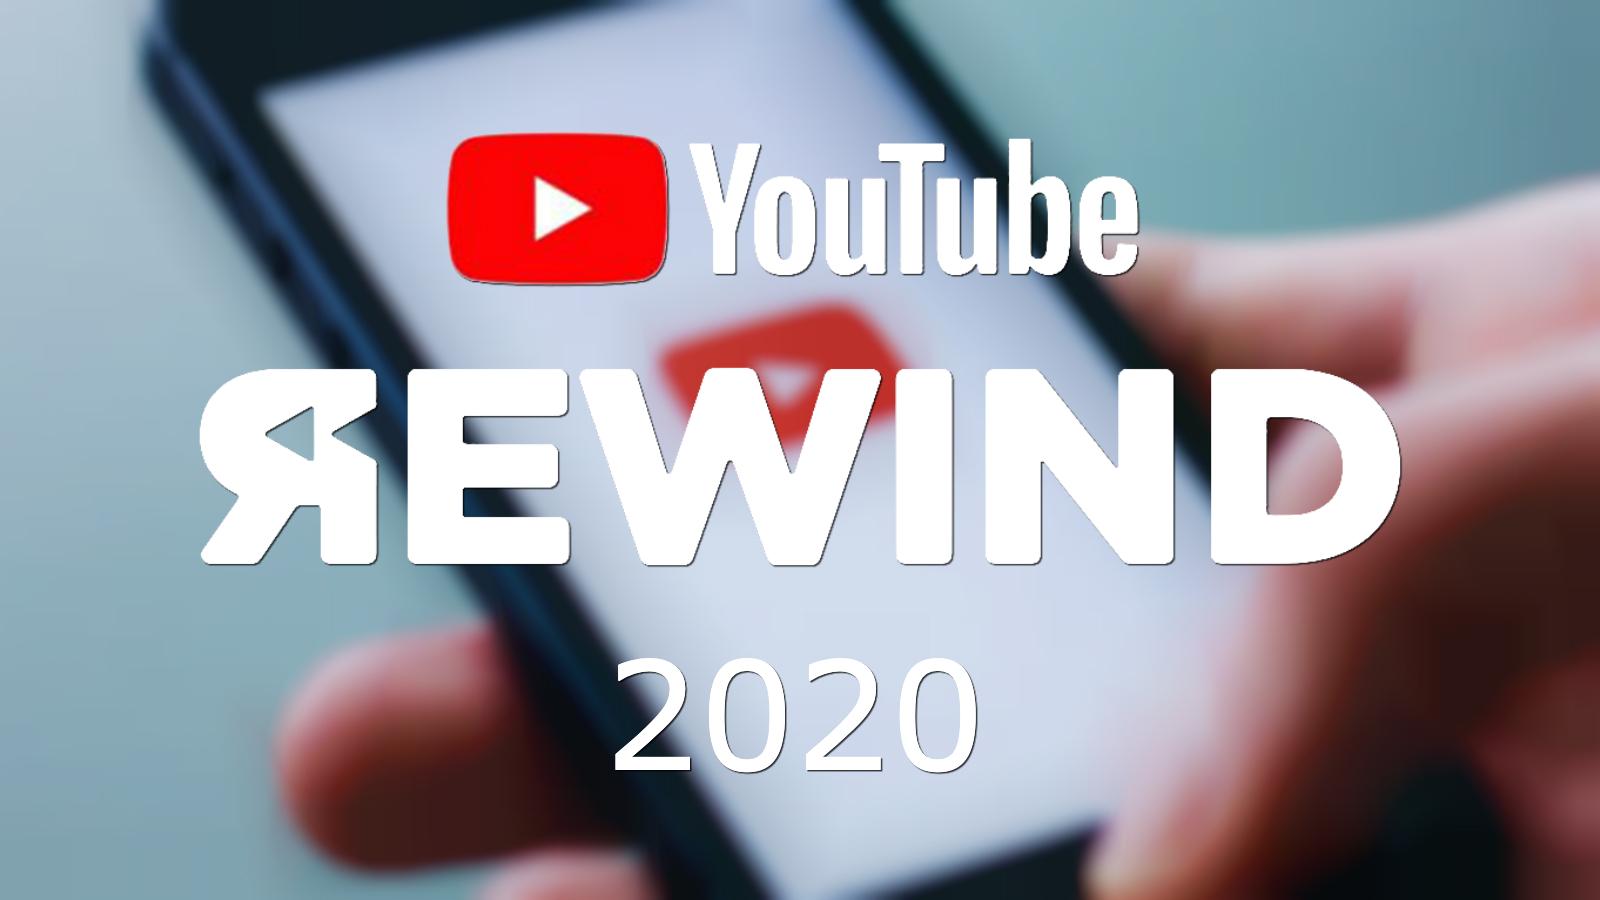 The YouTube Rewind logo is shown above a photo of the YouTube logo on a smart phone.